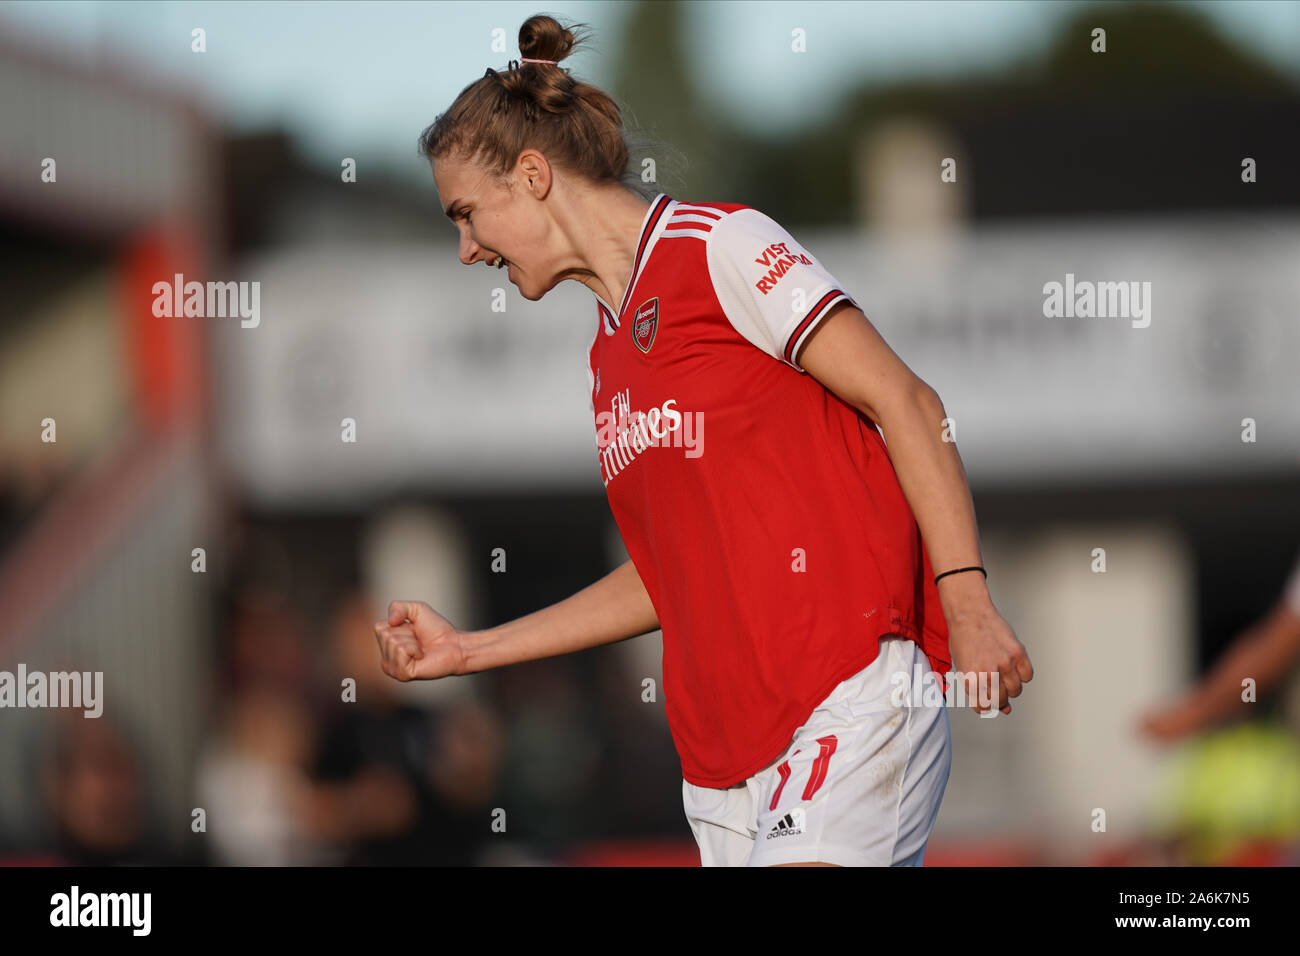 Borehamwood, UK. 27th Oct, 2019. Vivianne Miedema of Arsenal celebrates scoring during the Barclay's FA WSL football match between Arsenal vs Manchester City at Meadow Park on October 27, 2019 in Borehamwood, England (Photo by Daniela Porcelli/SPP) Credit: SPP Sport Press Photo. /Alamy Live News Stock Photo